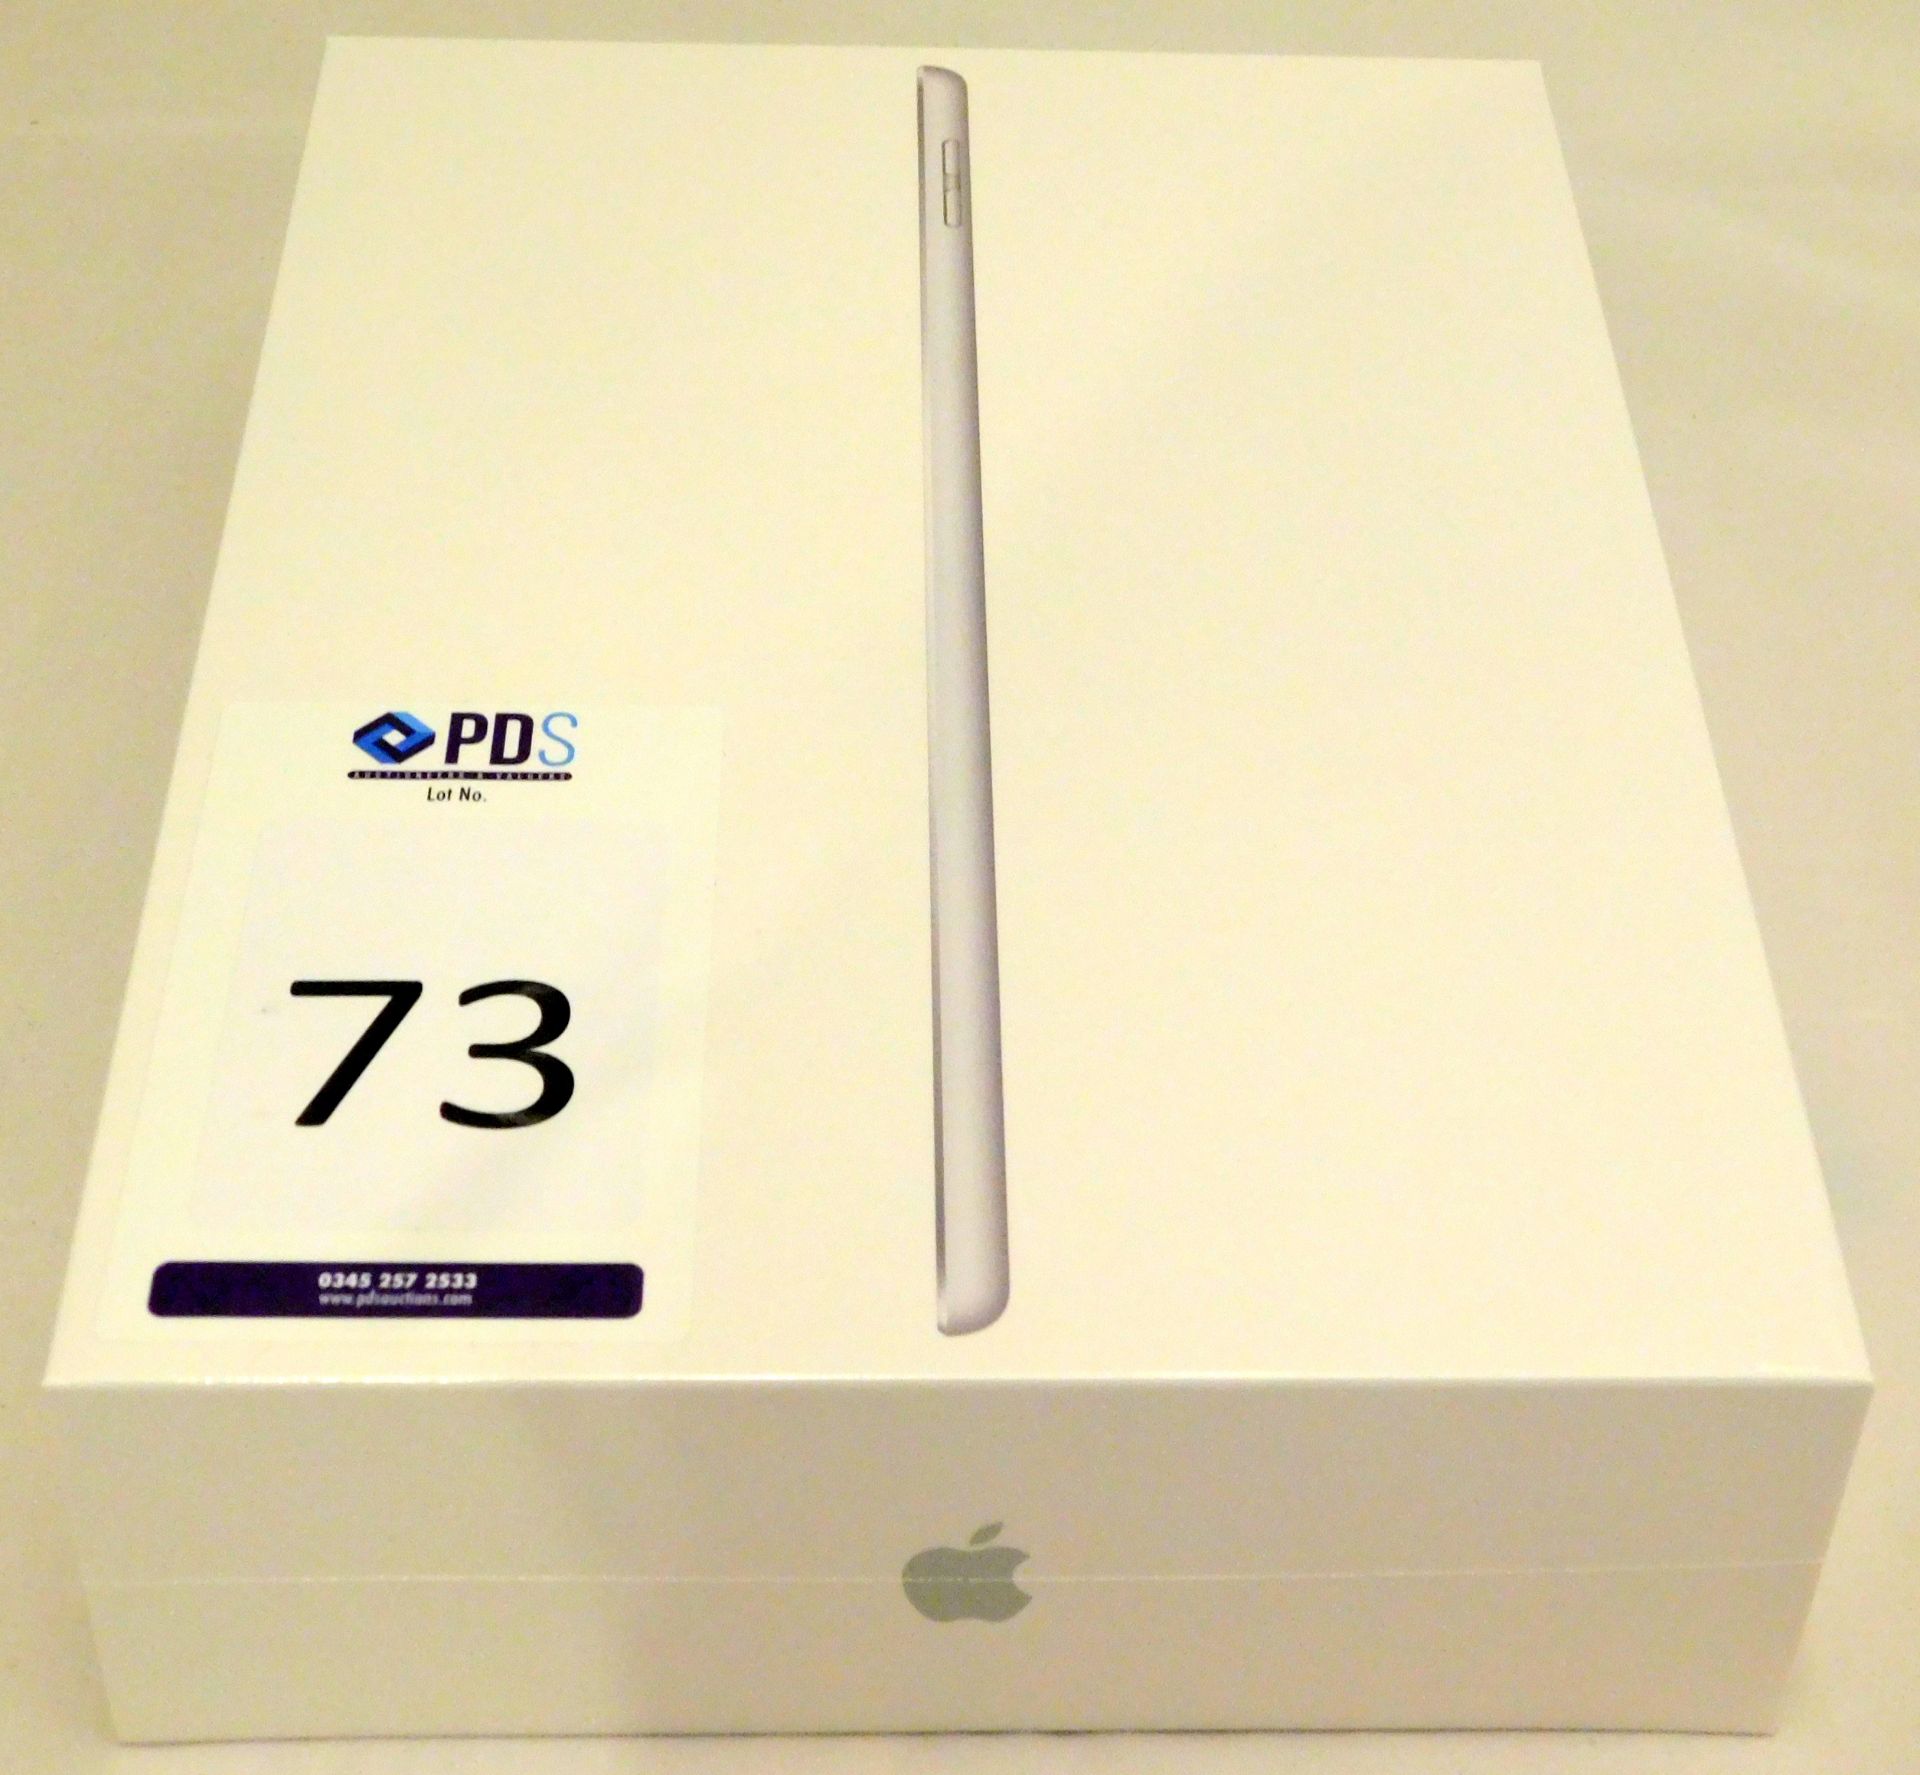 Apple A2197 iPad, 7th Gen, 32GB, Silver, Serial Number: DMPC80VDMF3N, (New in Sealed Box) (Located